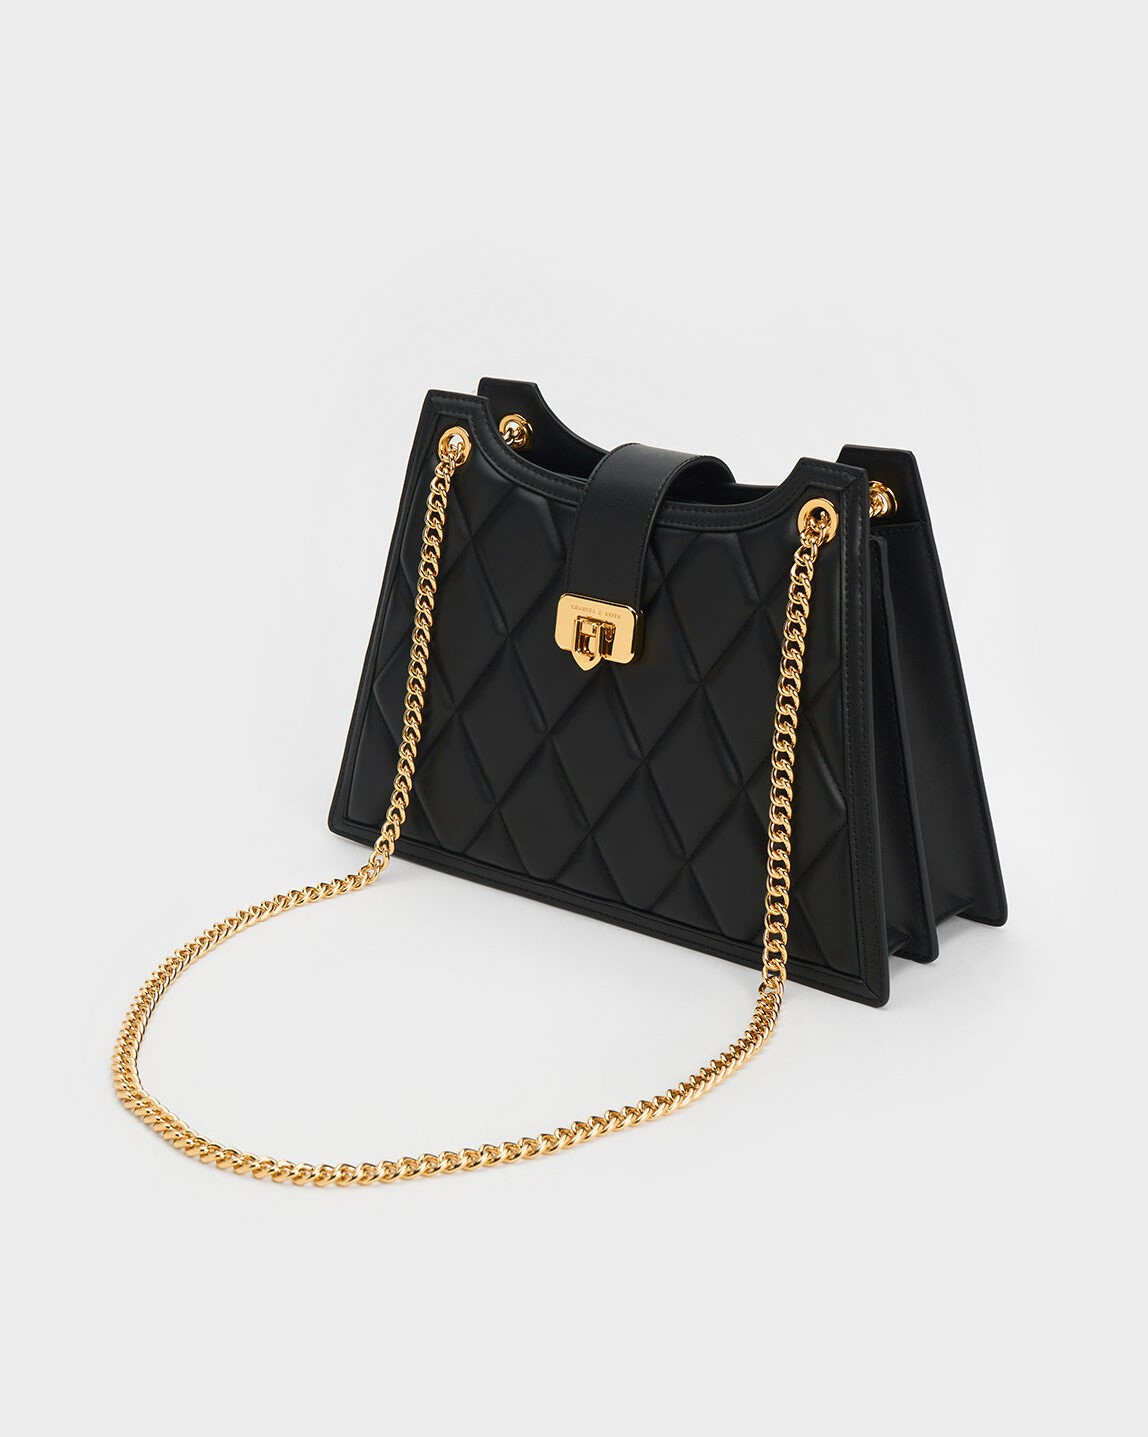 TÚI ĐEO VAI NỮ CNK CHARLES KEITH CRESSIDA QUILTED TRAPEZE CHAIN BAG CK2-30151307 9